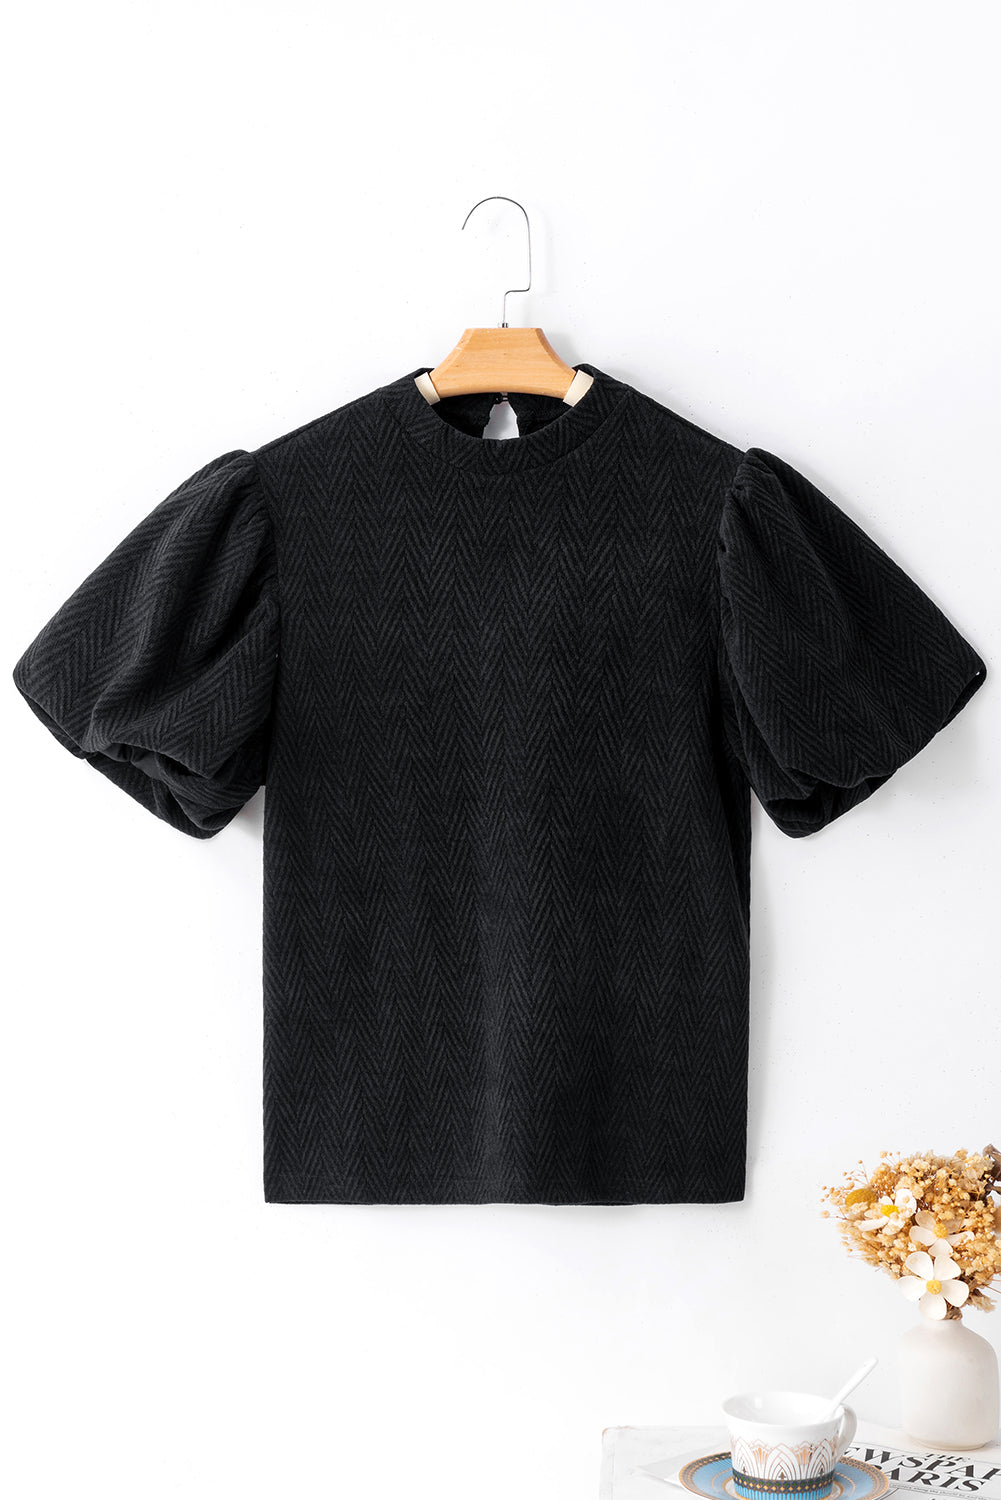 Black Solid Textured Puff Sleeve Mock Neck Blouse